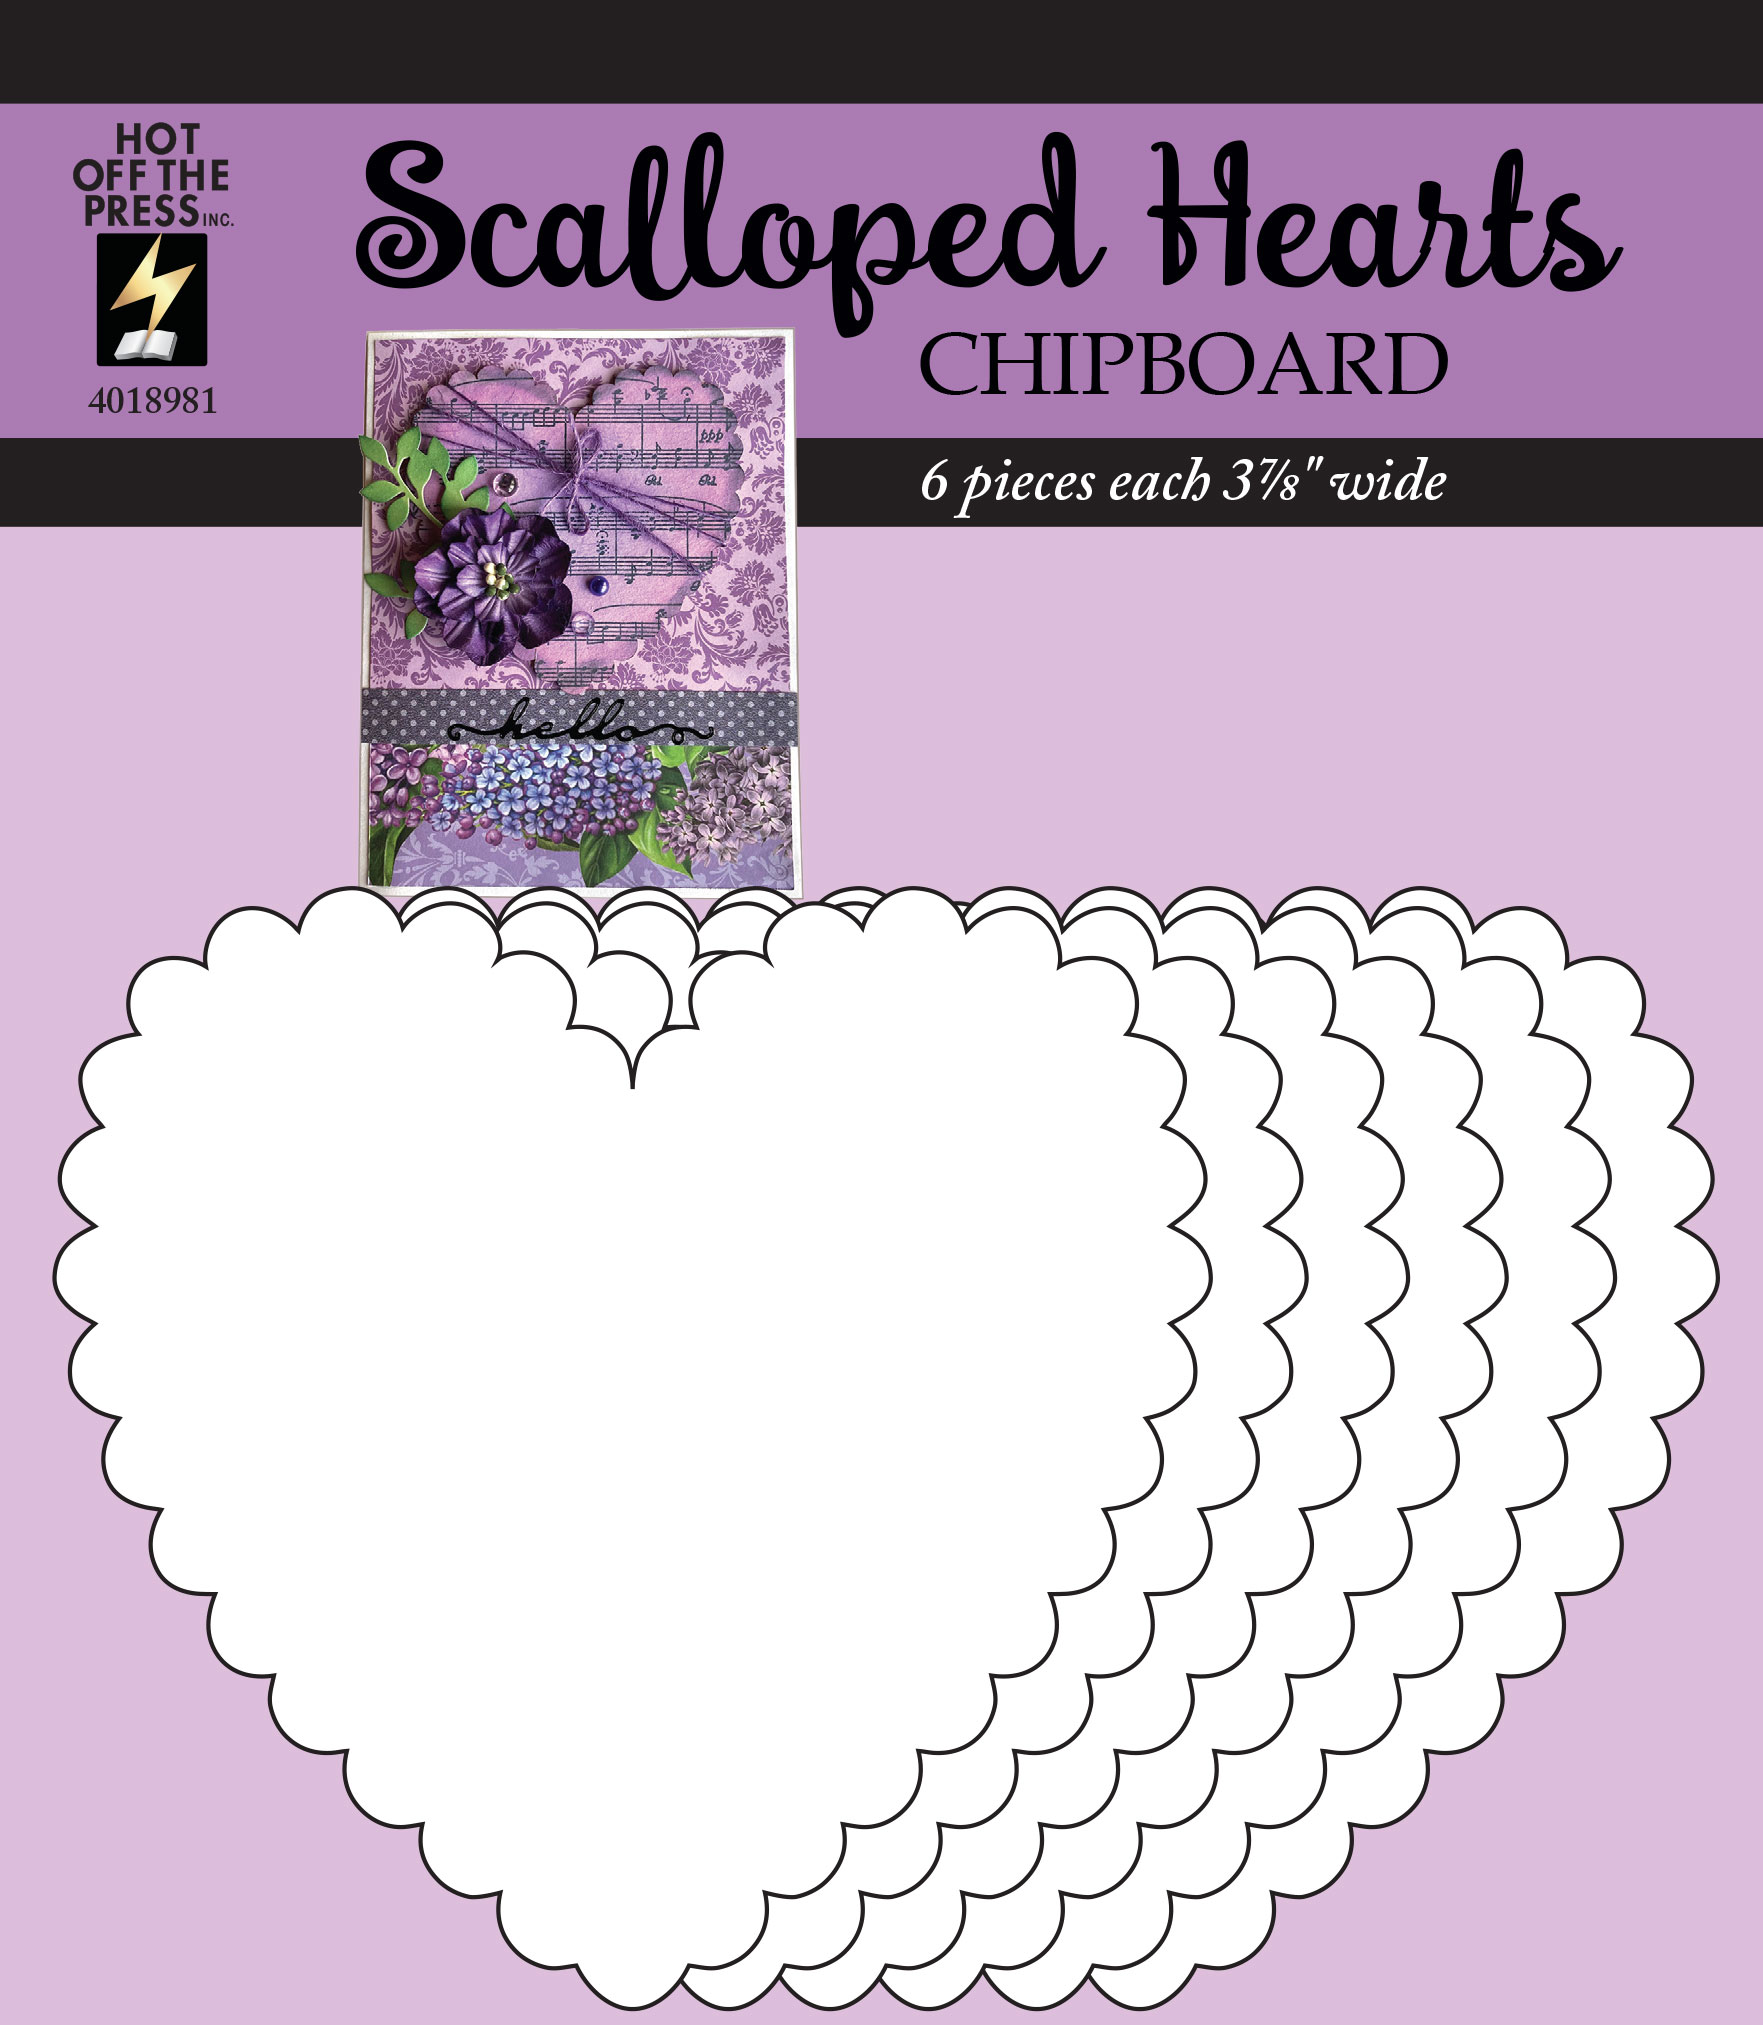 Scalloped Hearts Chipboard, 6 pieces